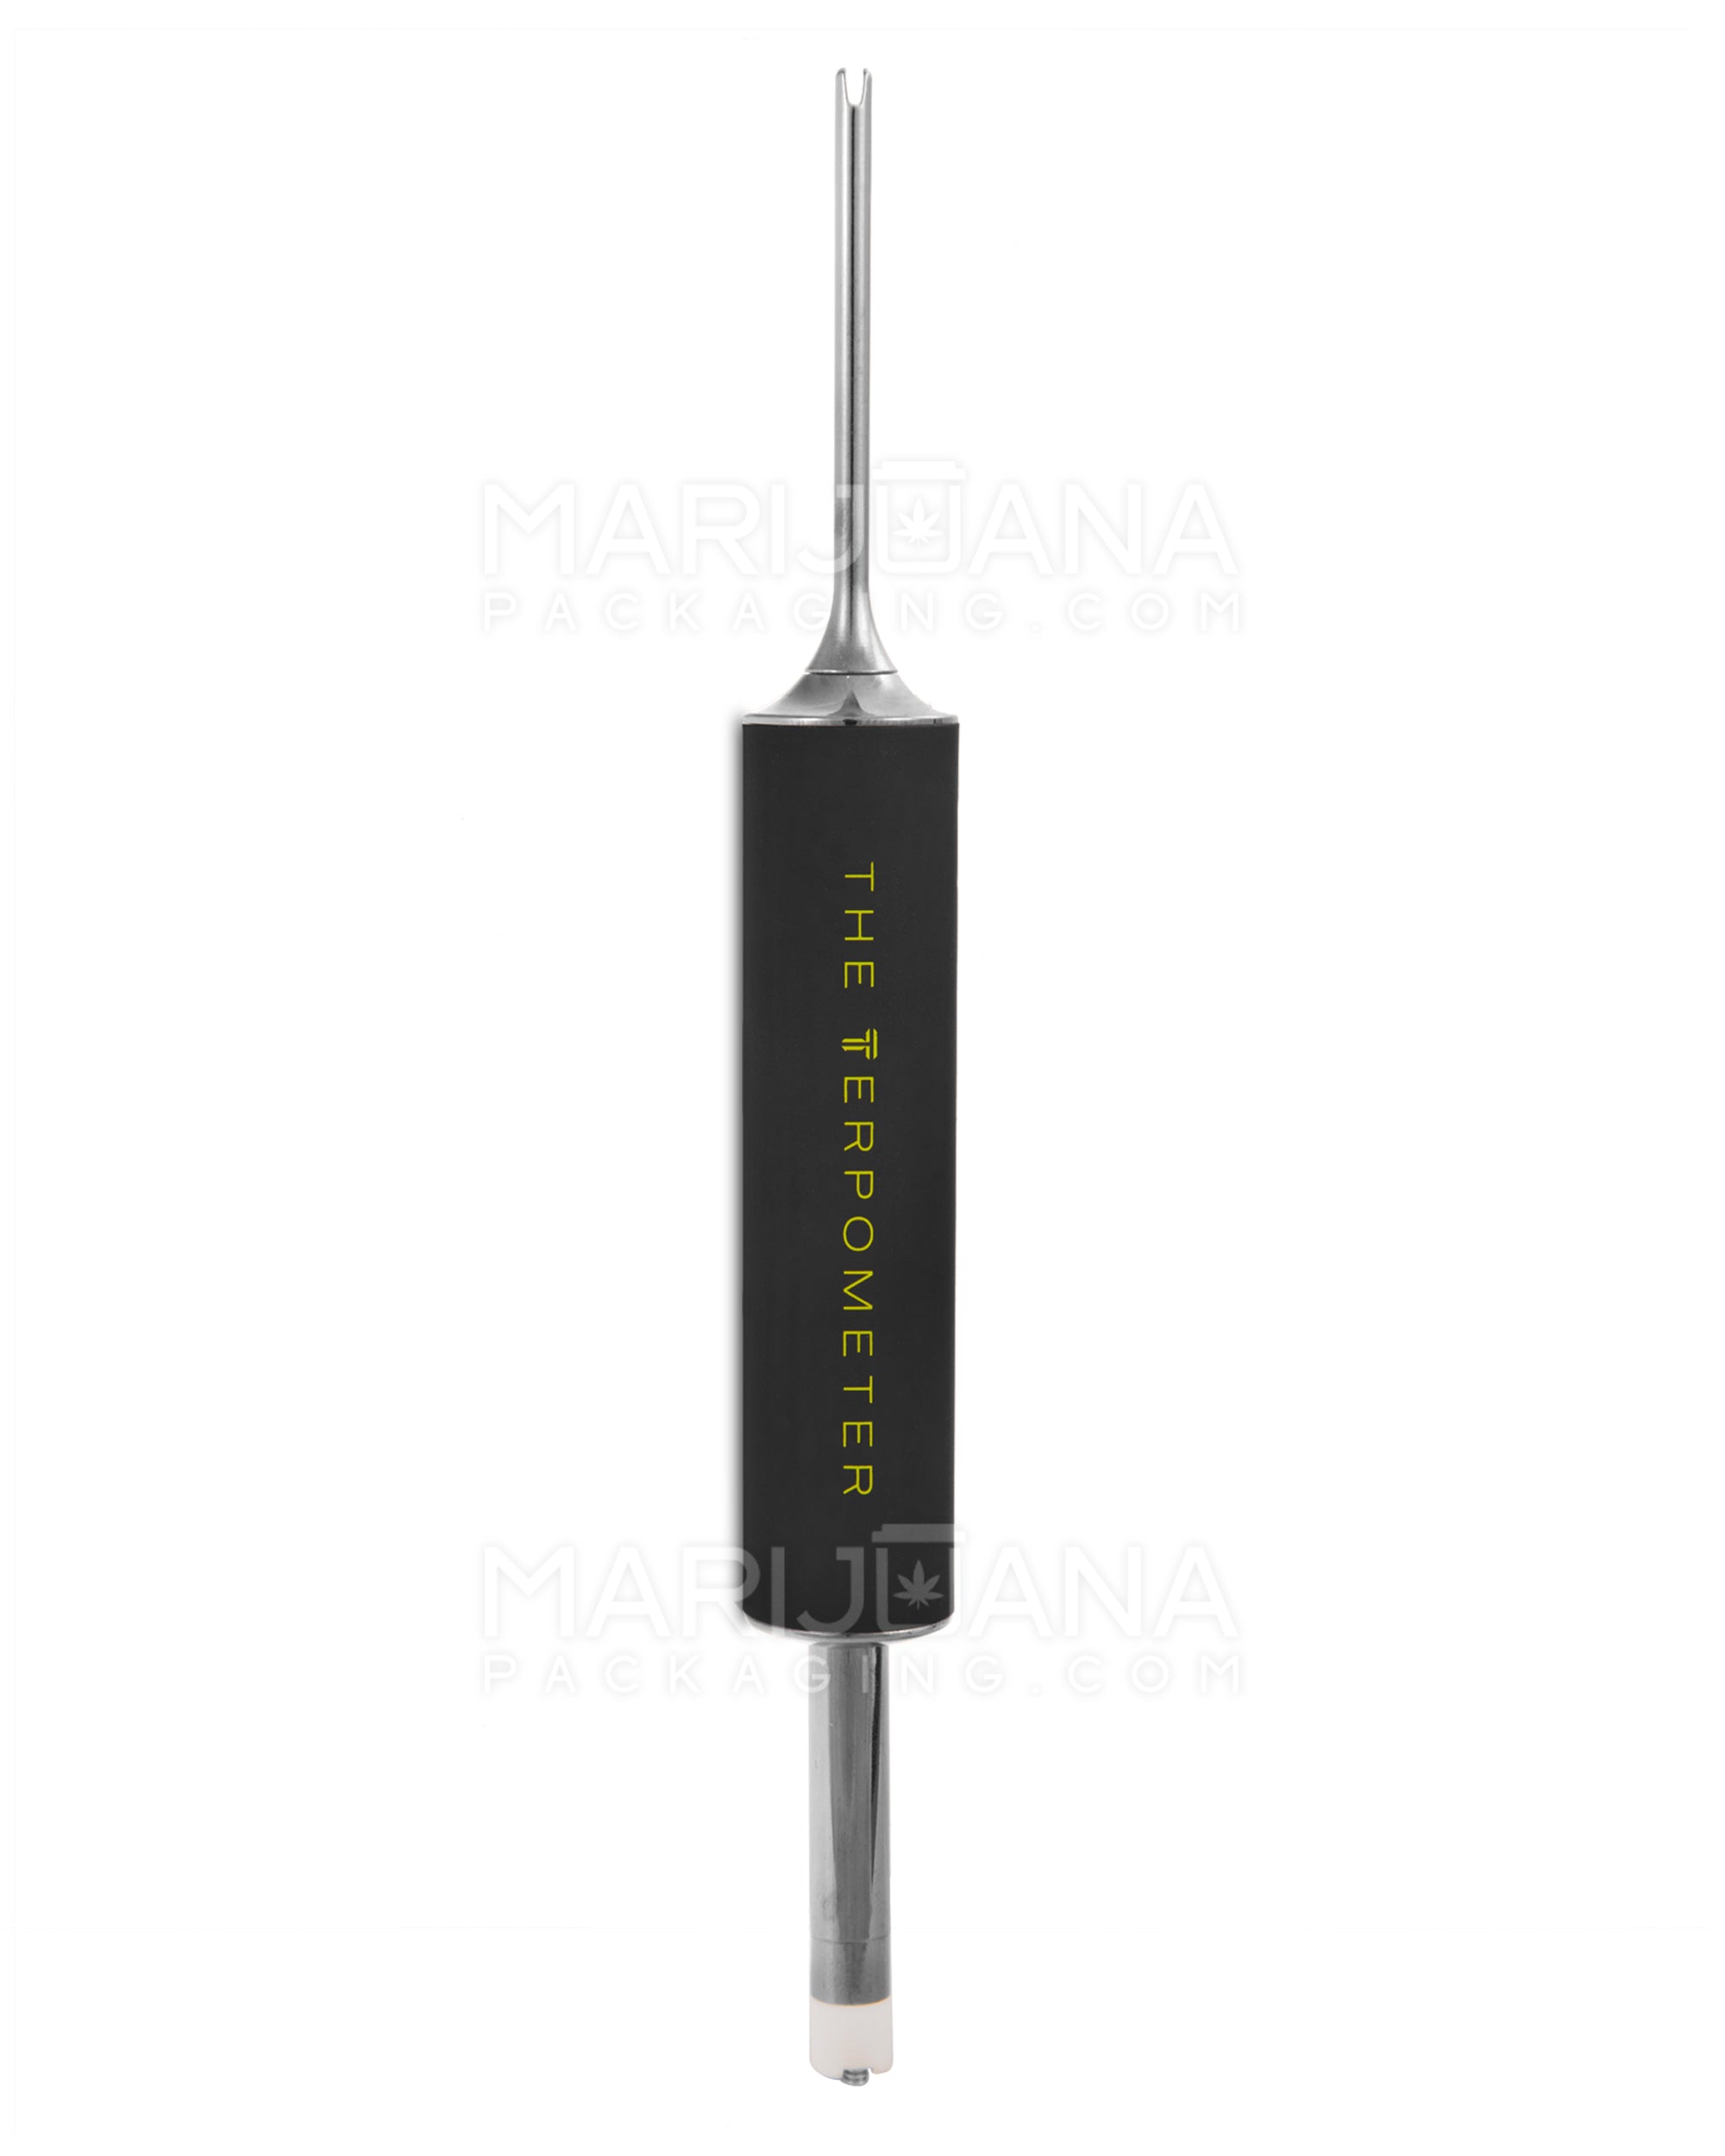 TERPOMETER | Temperature Indicating Thermometer Dab Tool w/ USB Cable | 6.5in Long - Titanium - Black - 3